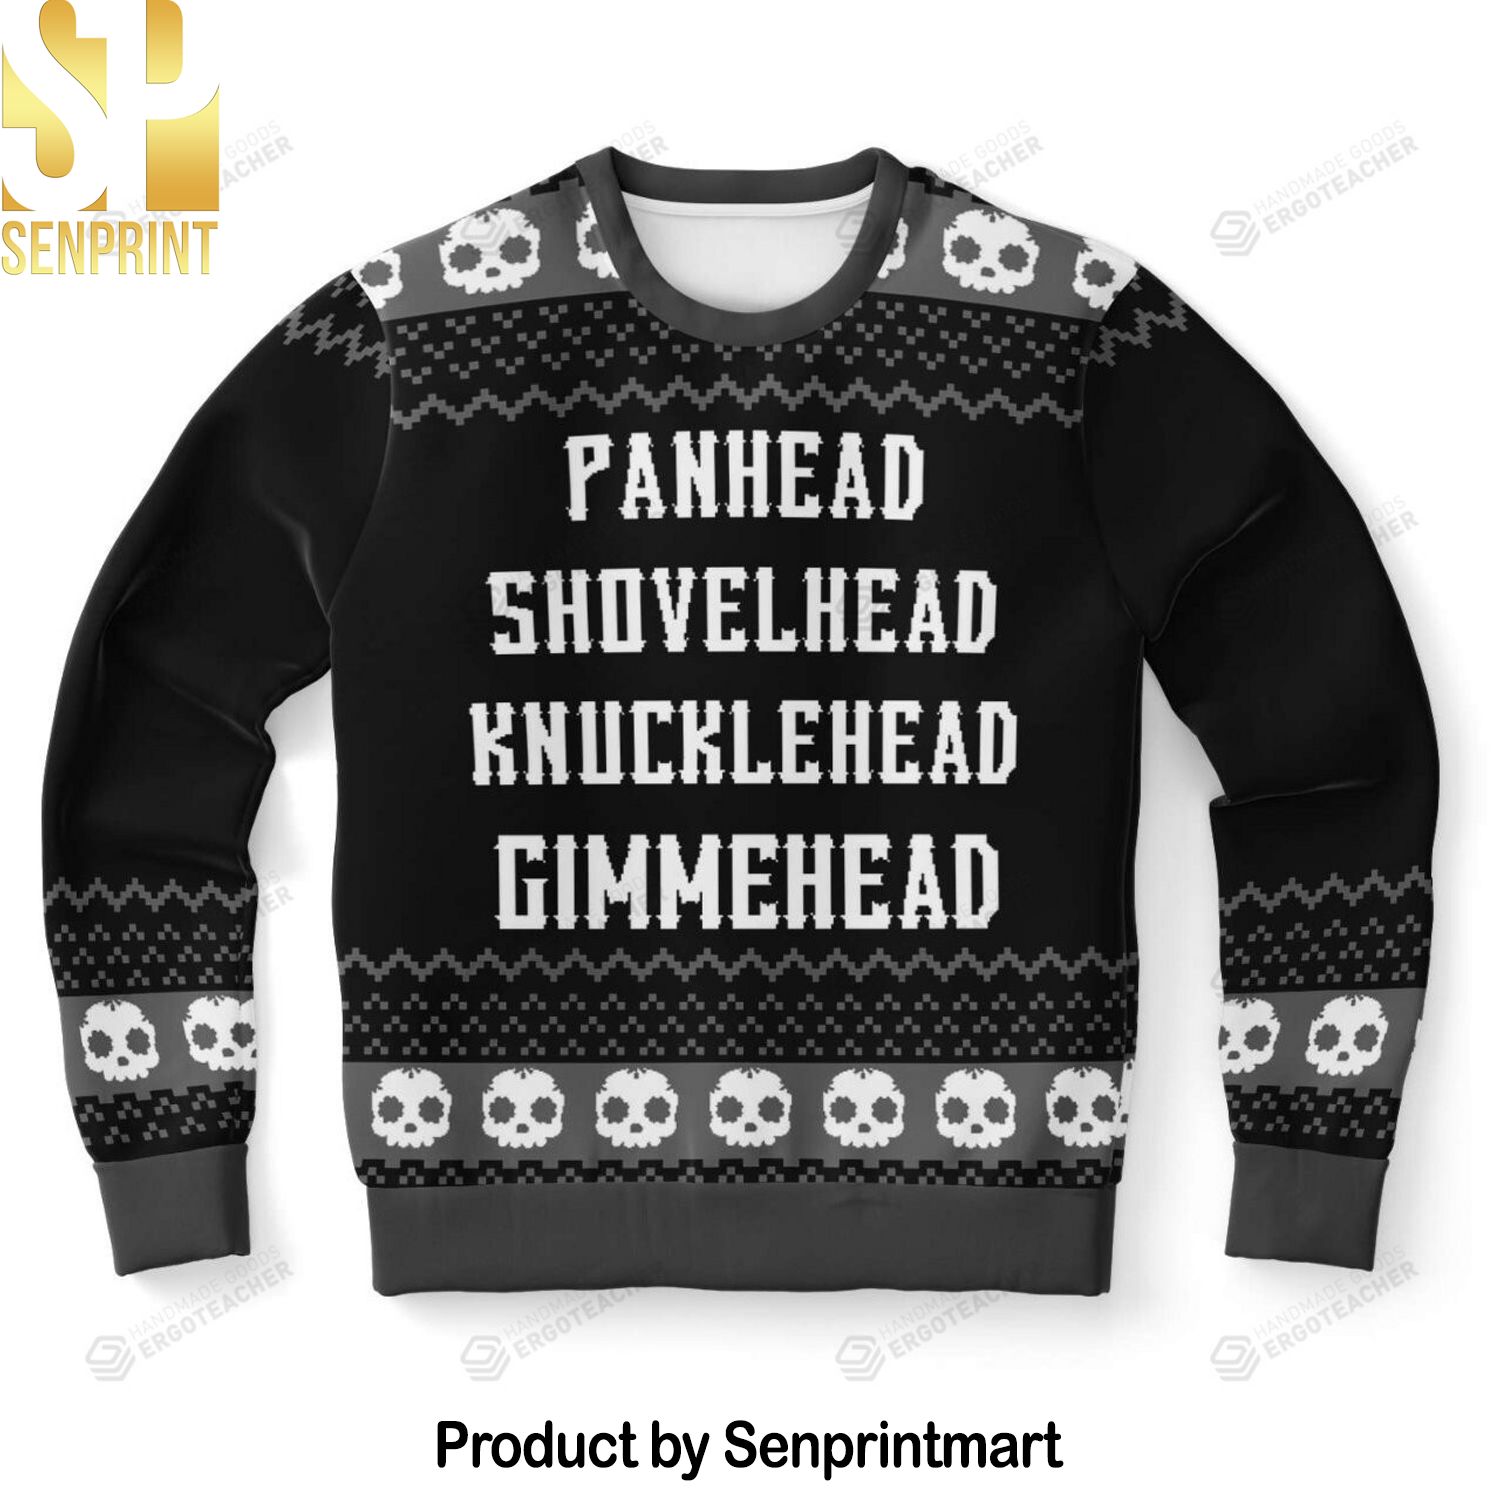 Gimhead Naughty For Christmas Gifts Ugly Christmas Wool Knitted Sweater